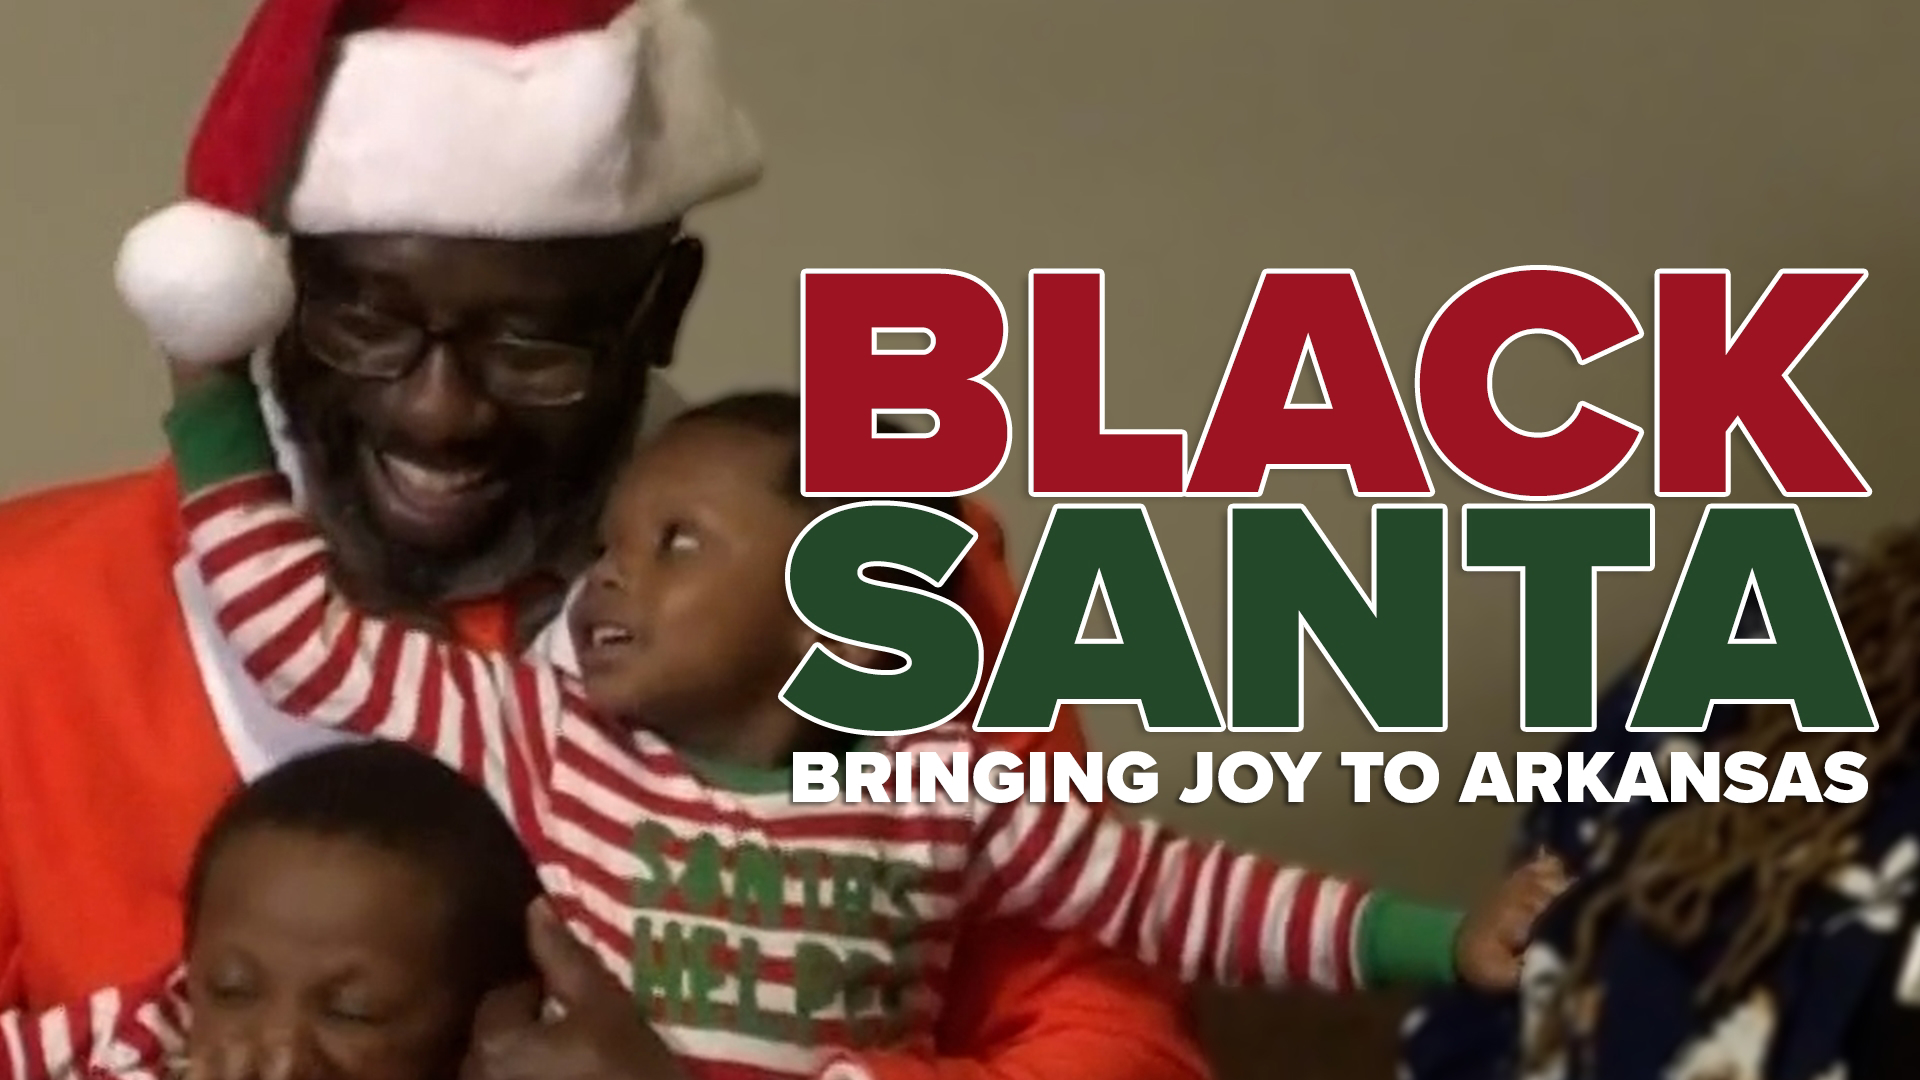 Since 2018, we have watched Eric Lamb's role as Black Santa grow to giving nearly 500 kids in need toys, clothes, and more every Christmas.